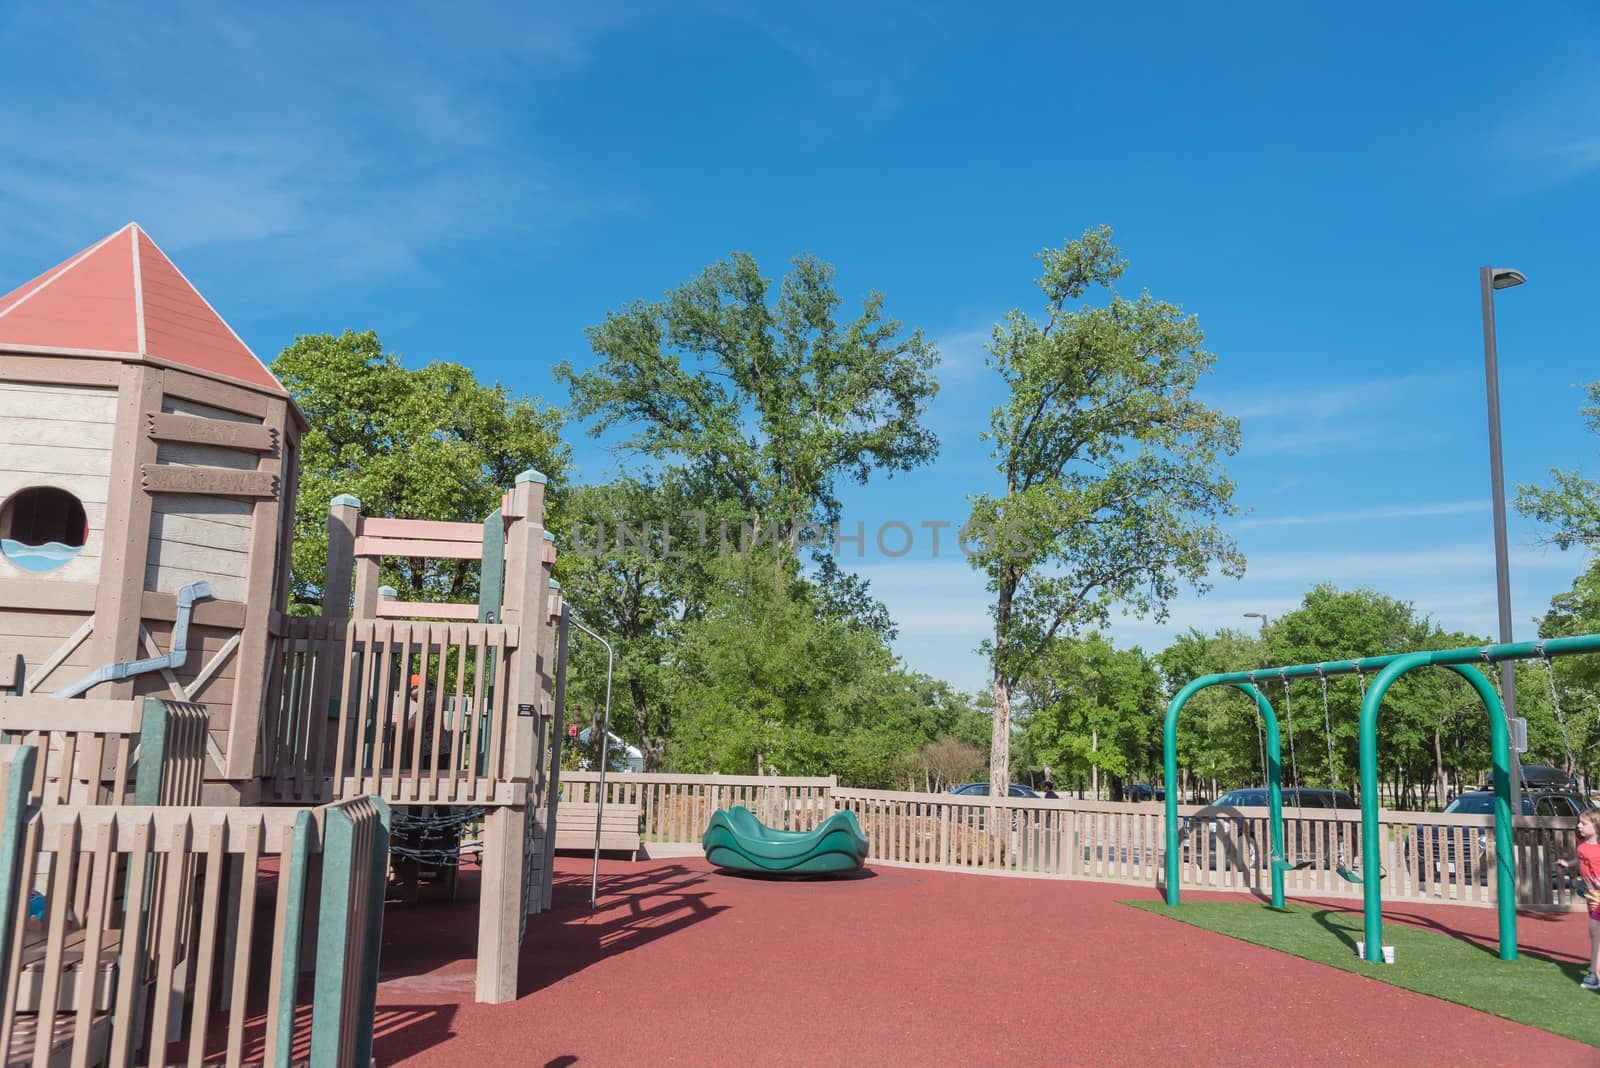 Wooden playground, castle-inspired structure with soft rubber surface near Dallas, Texas, USA